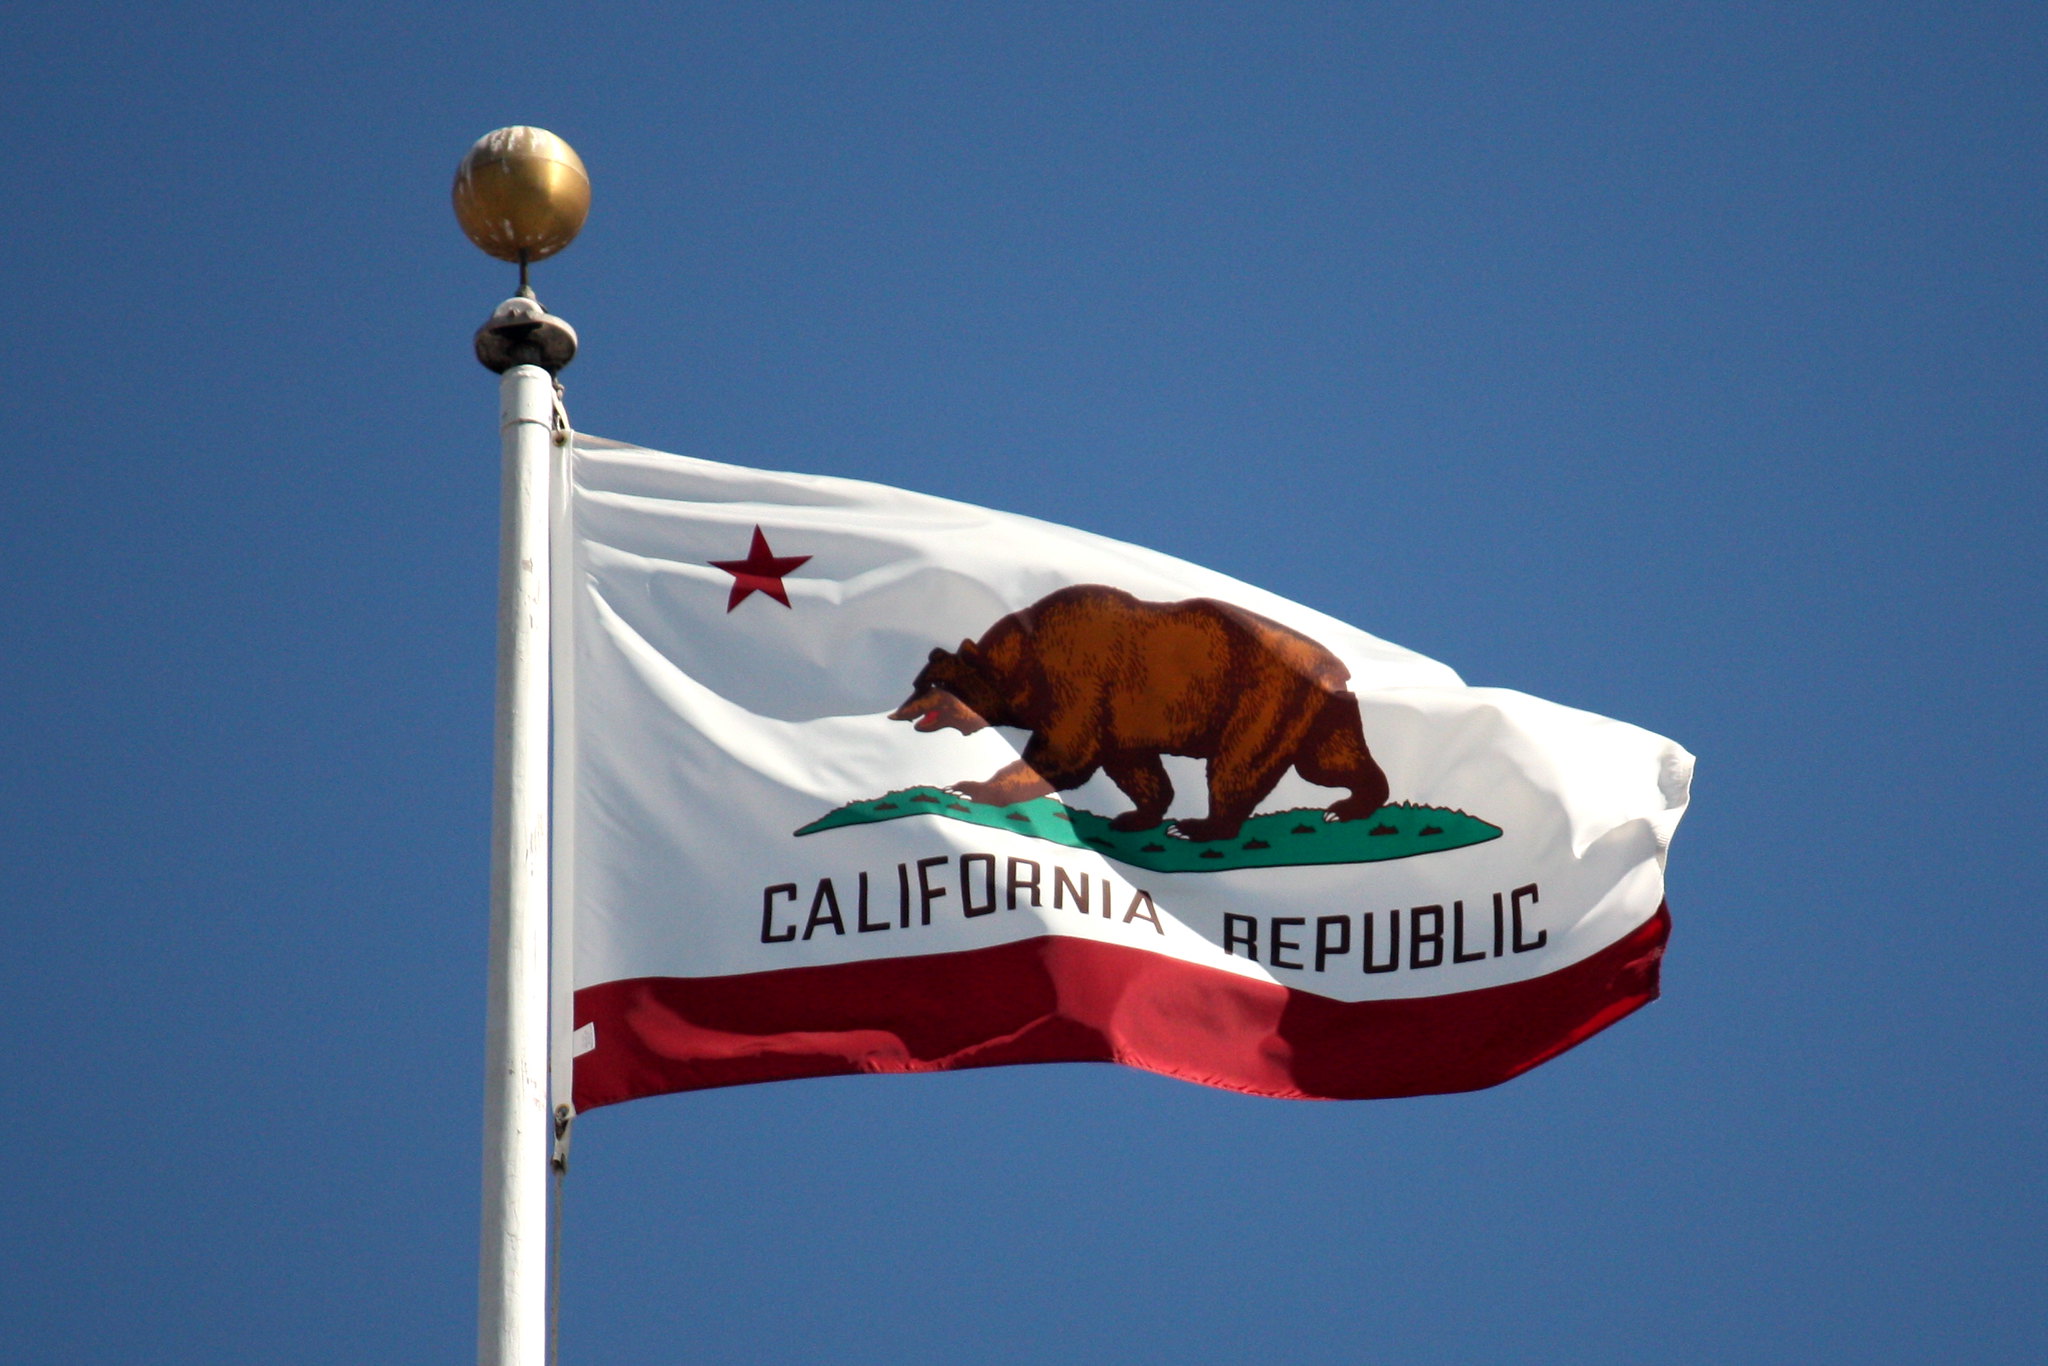 PHOTO: The flag of California features a bear and the text, "California Republic". Photo courtesy of Scazon on Flickr. SOURCE: https://www.flickr.com/photos/scazon/3055252354